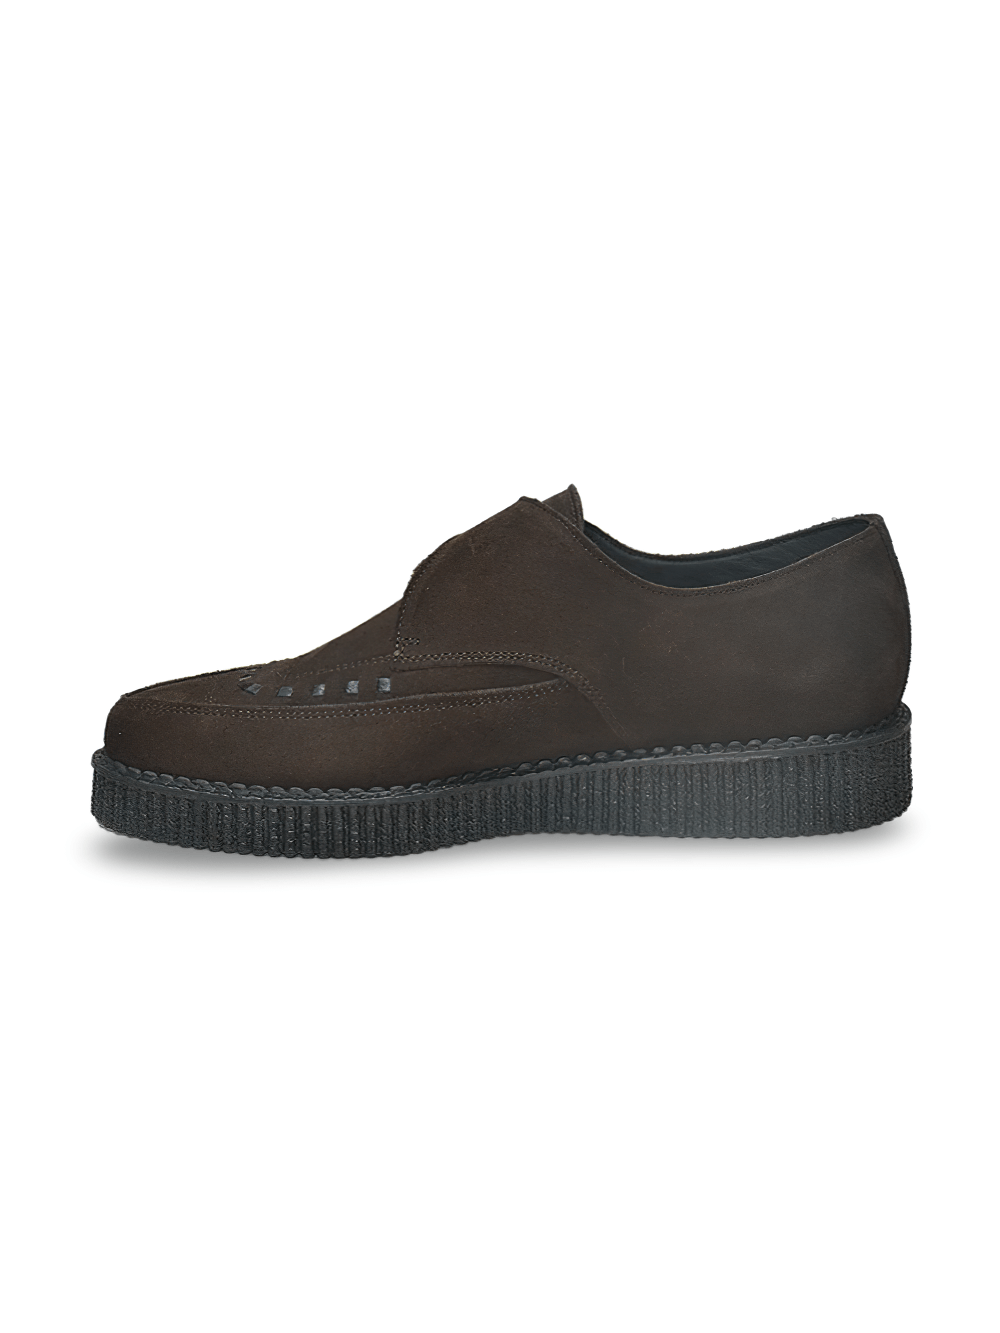 Unisex Suede Pointed Creepers with Buckle Closure